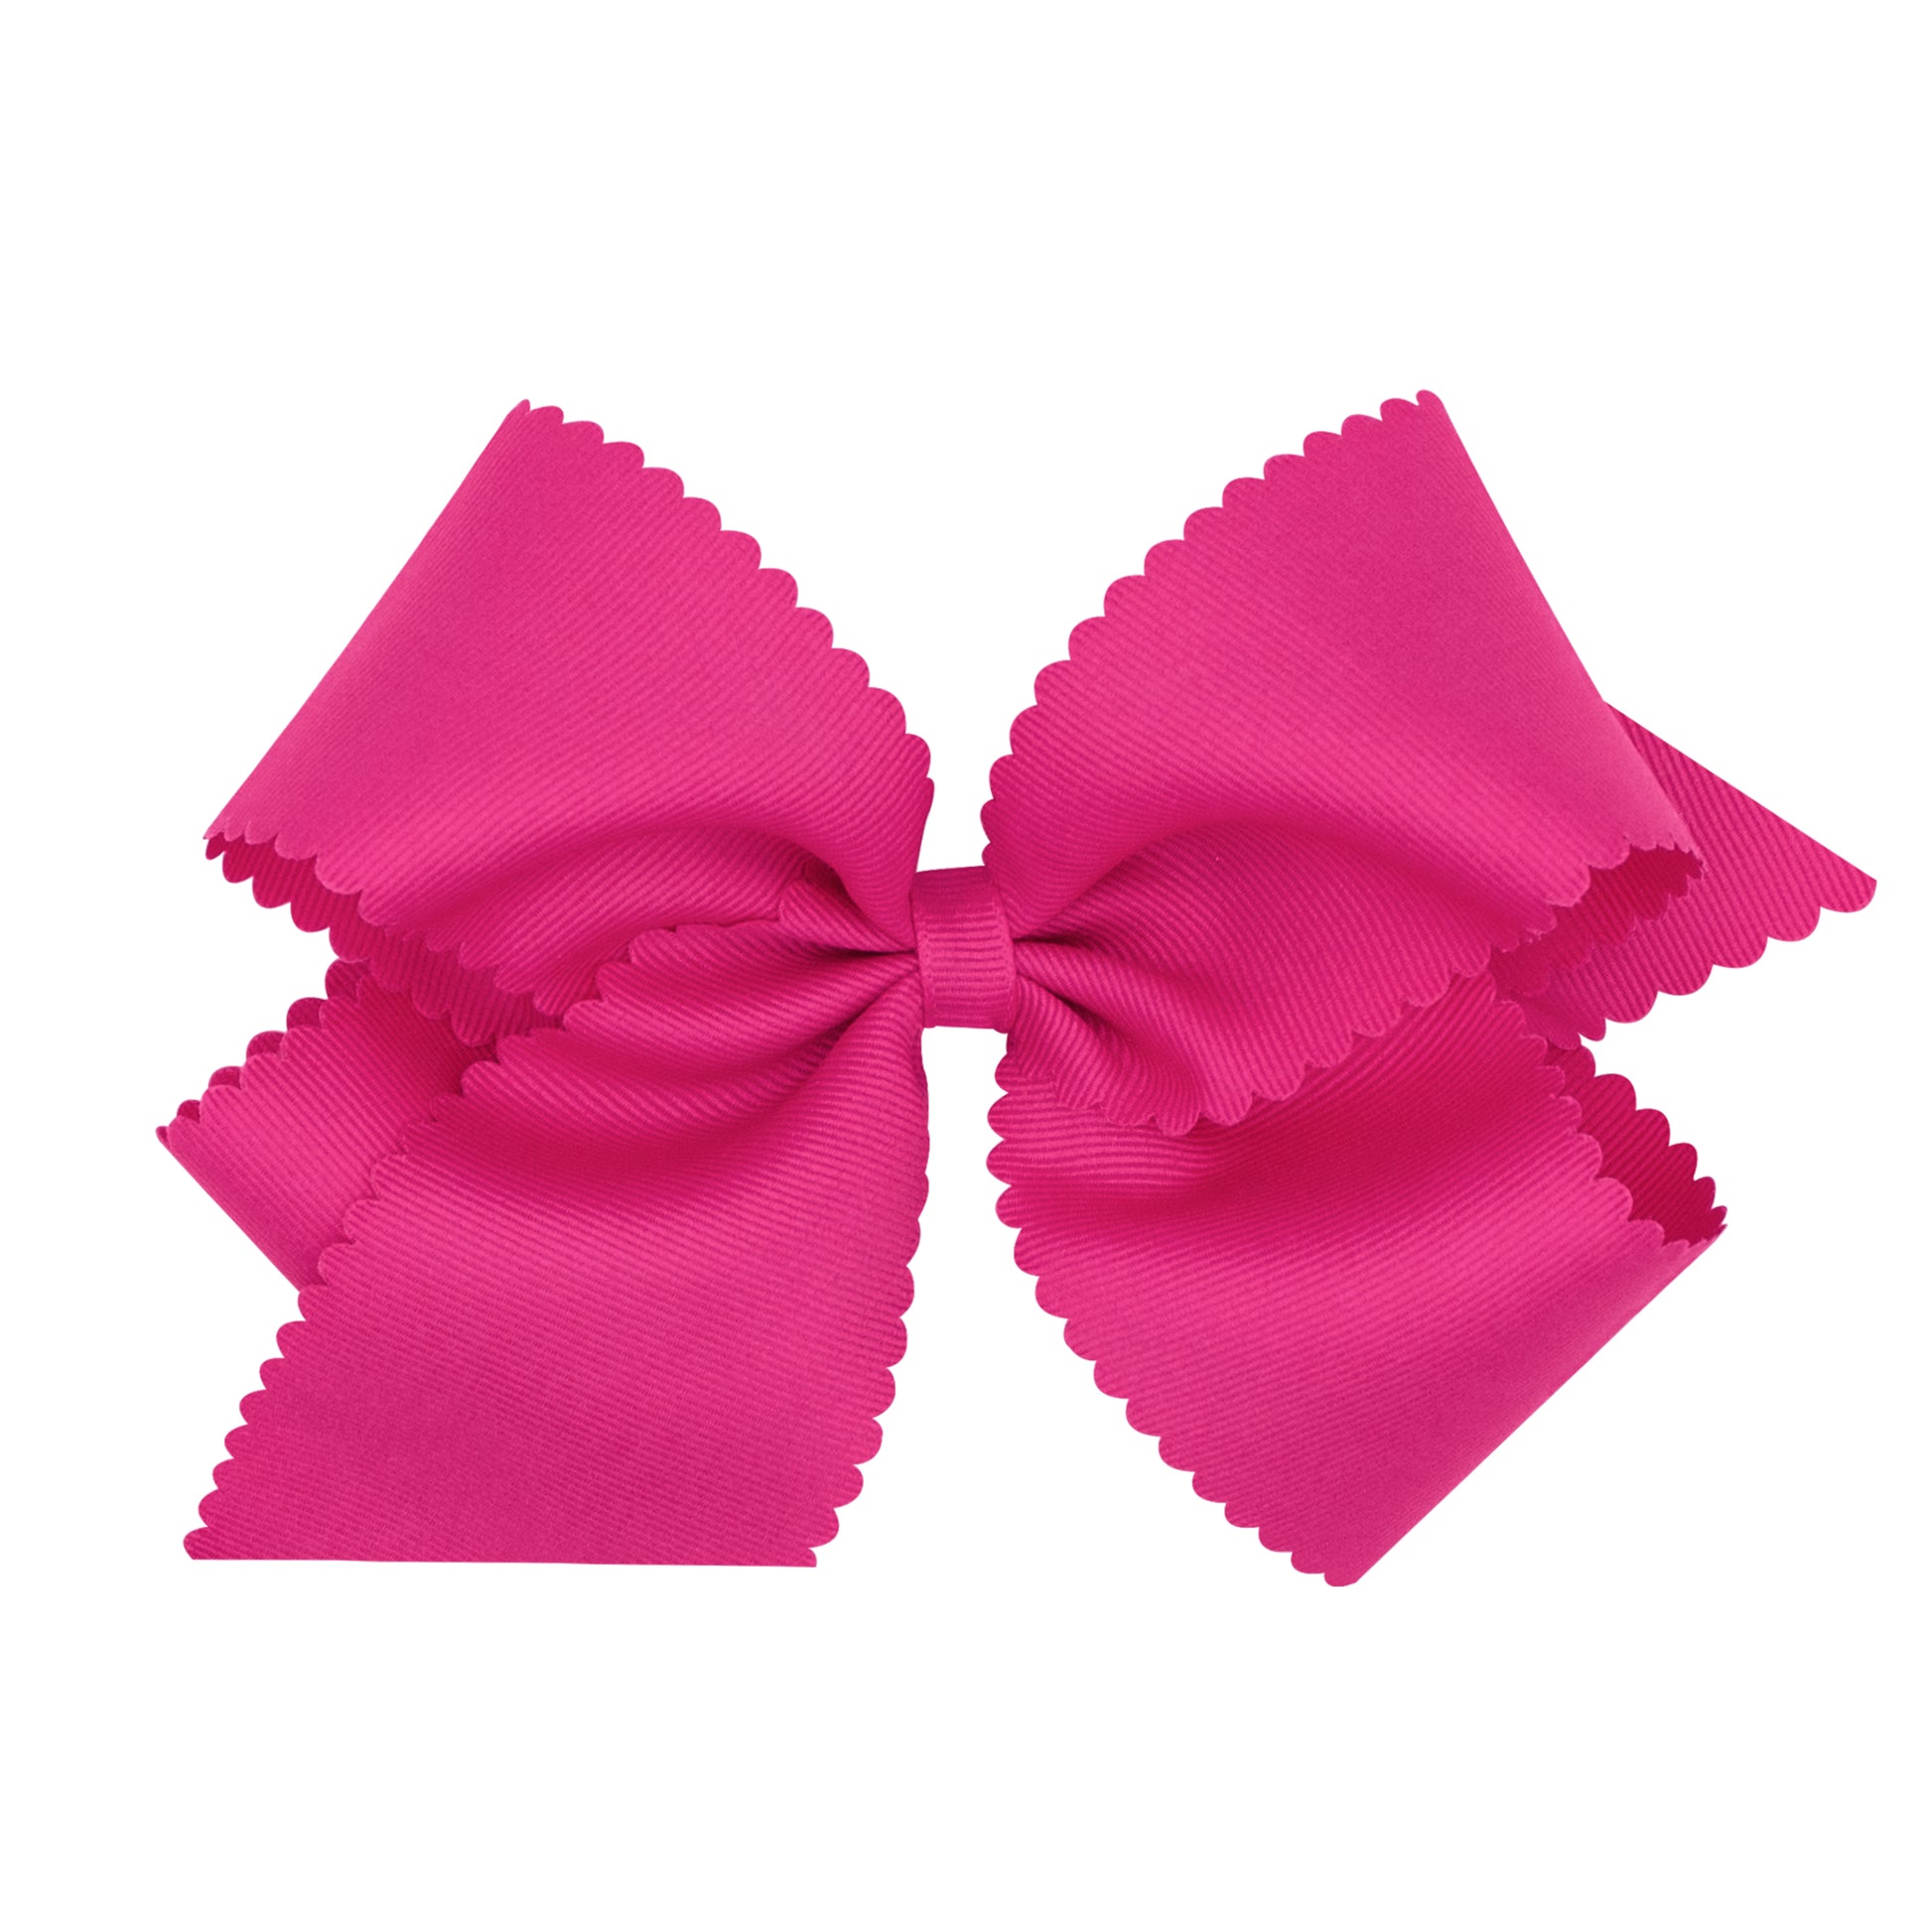 Wee Ones King Grosgrain Scalloped Edge "Shocking Pink" Hair Bow